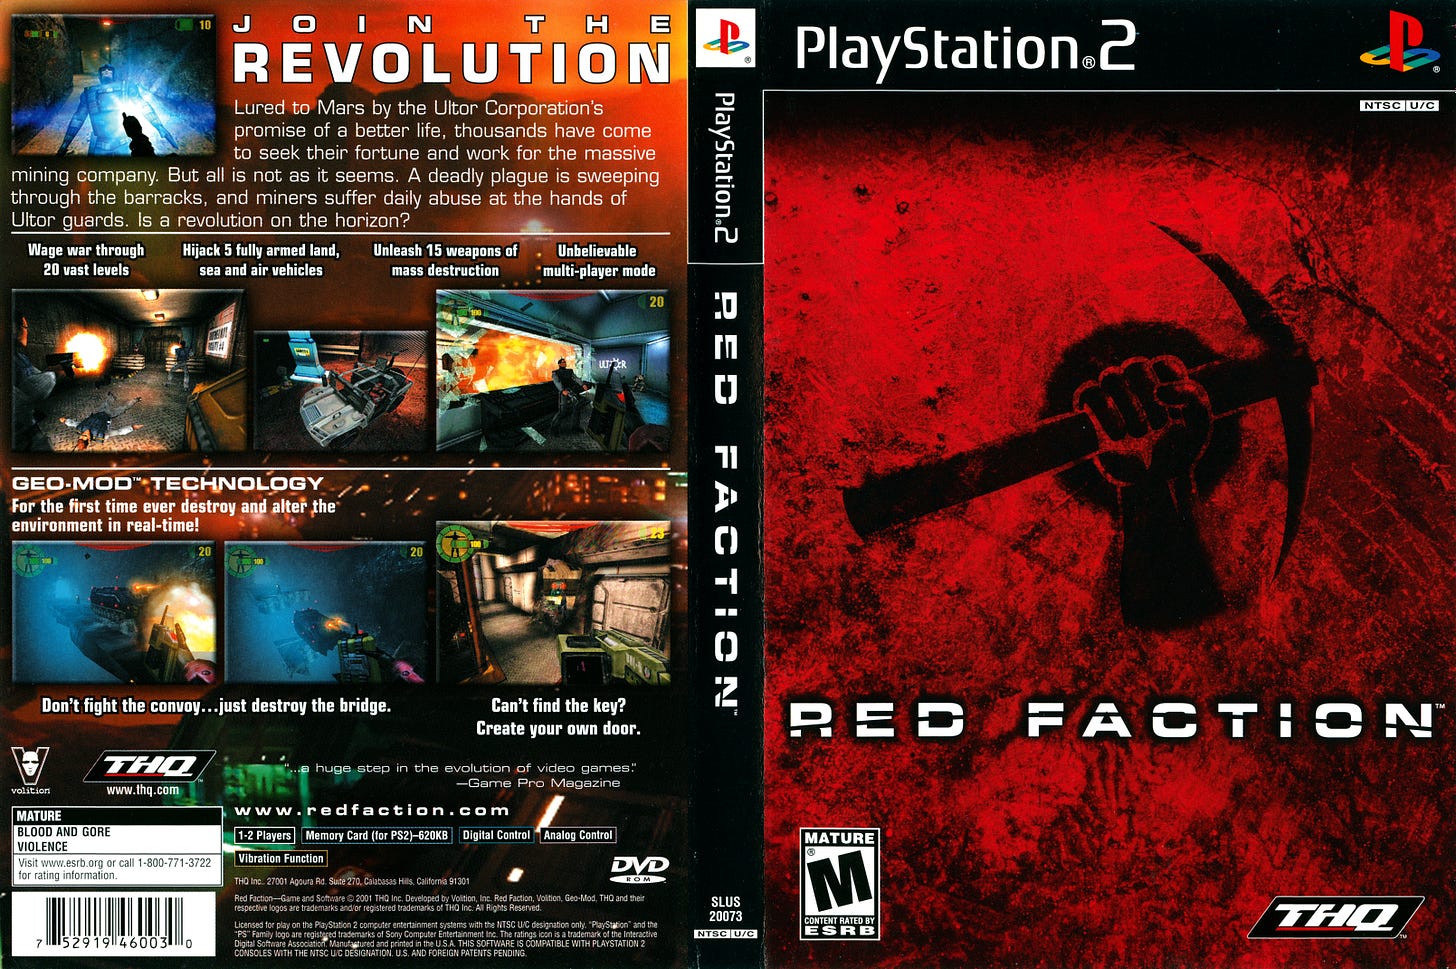 The full back and front box art for the Playstation 2 version of Red Faction. The tagline on the back says "Join the Revolution" in larger text, before explaining that the promise of a better life on Mars was a lie to enrich the powerful mining that controls the planet. The front of the box features a modified version of the image used in Soviet art, which is usually holding a hammer or a sickle here, but is instead holding a pickax to represent the miners at the center of the game.